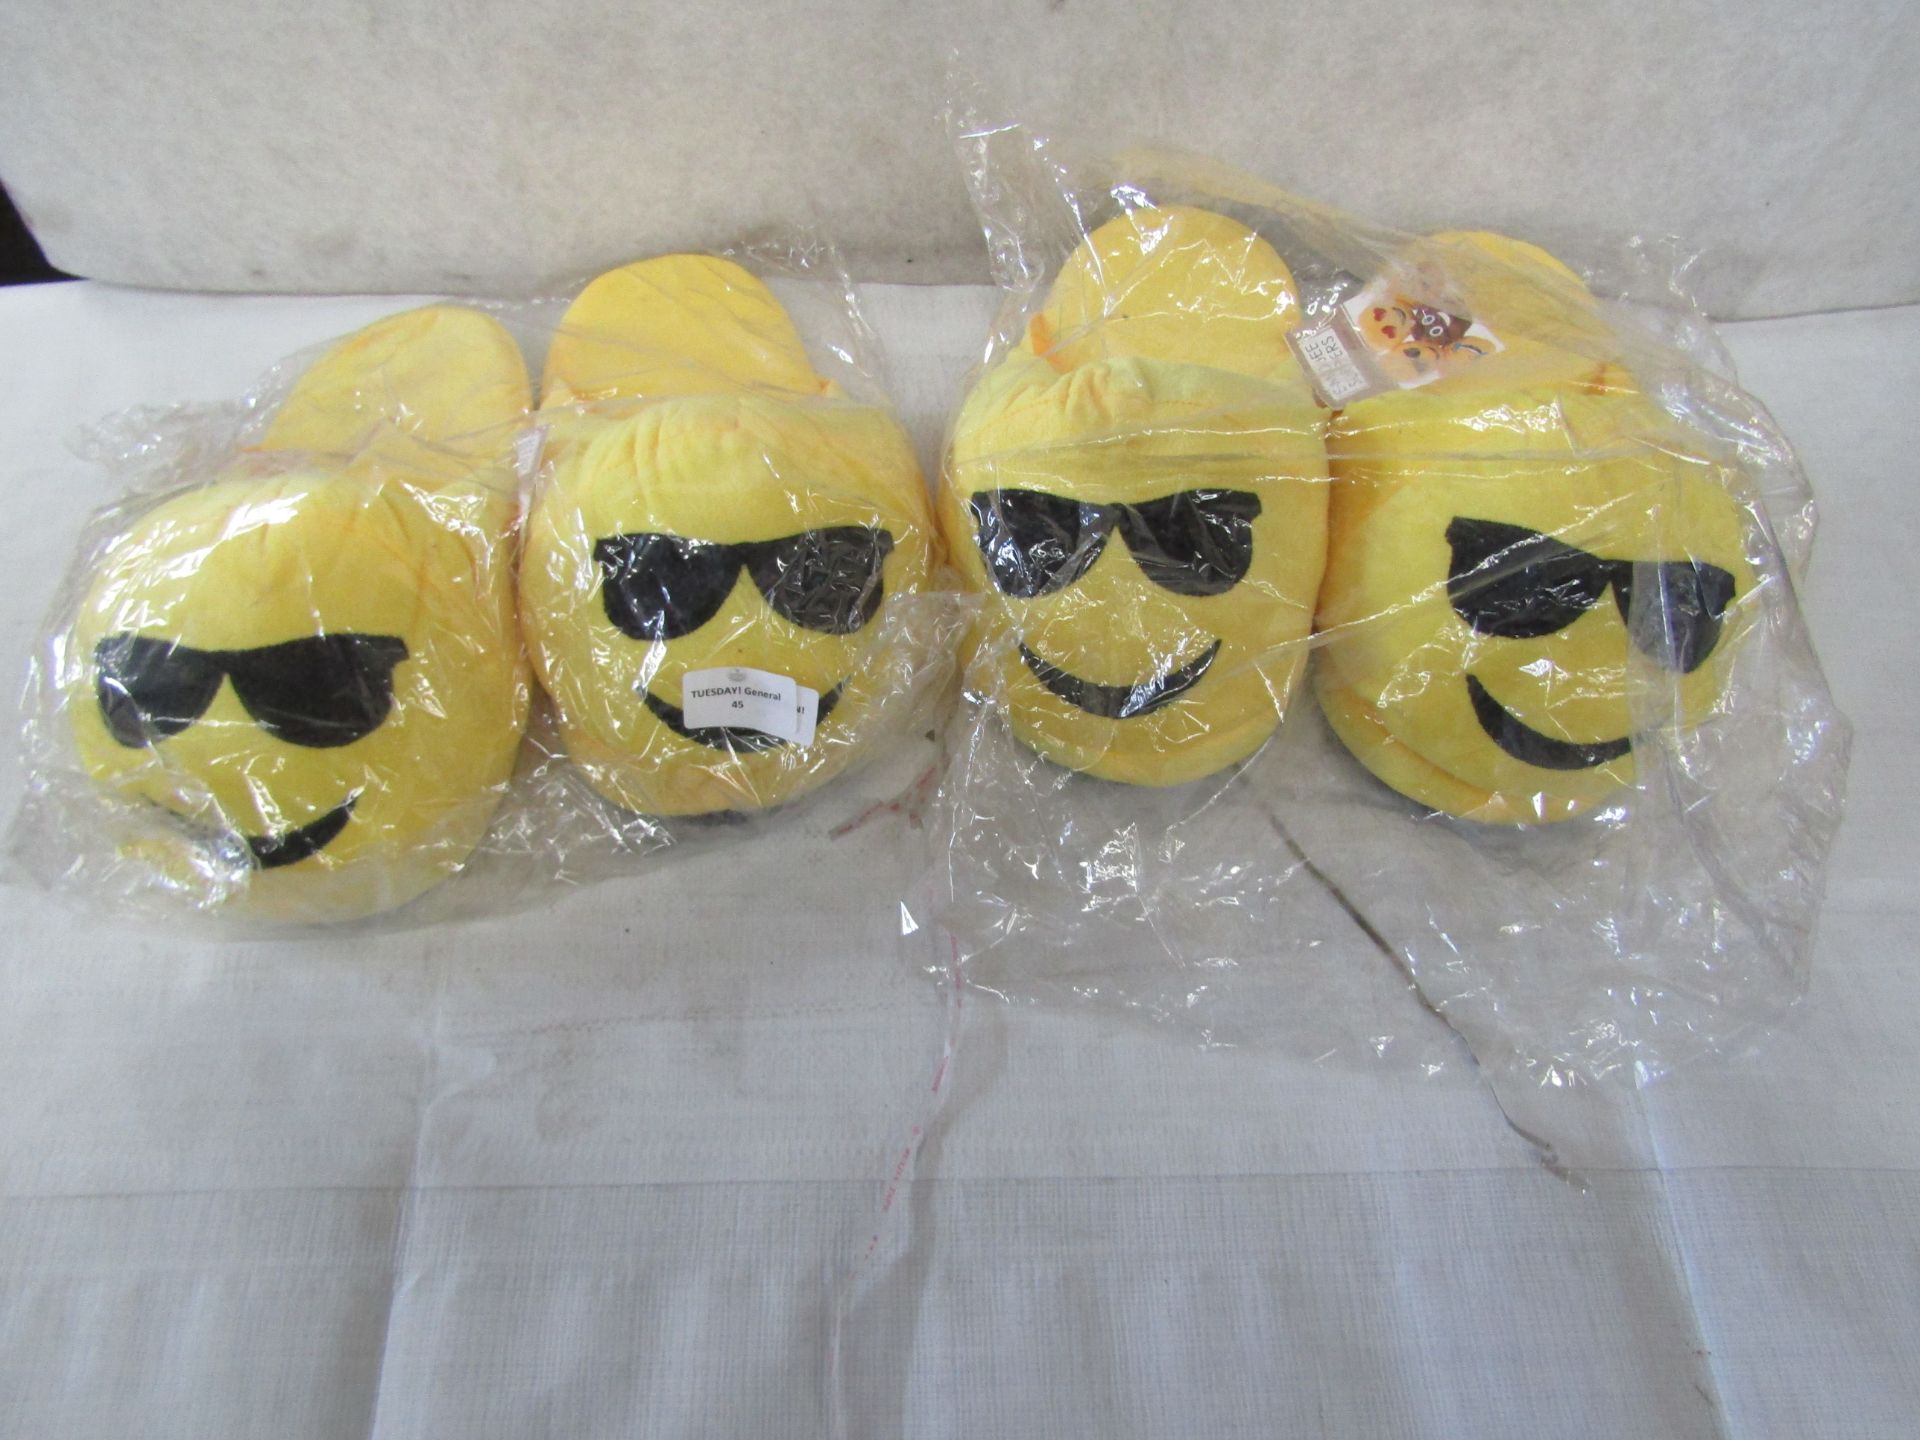 2X Sunglasses Emoji Slippers ( One Size Fits Most ) - Packaged.